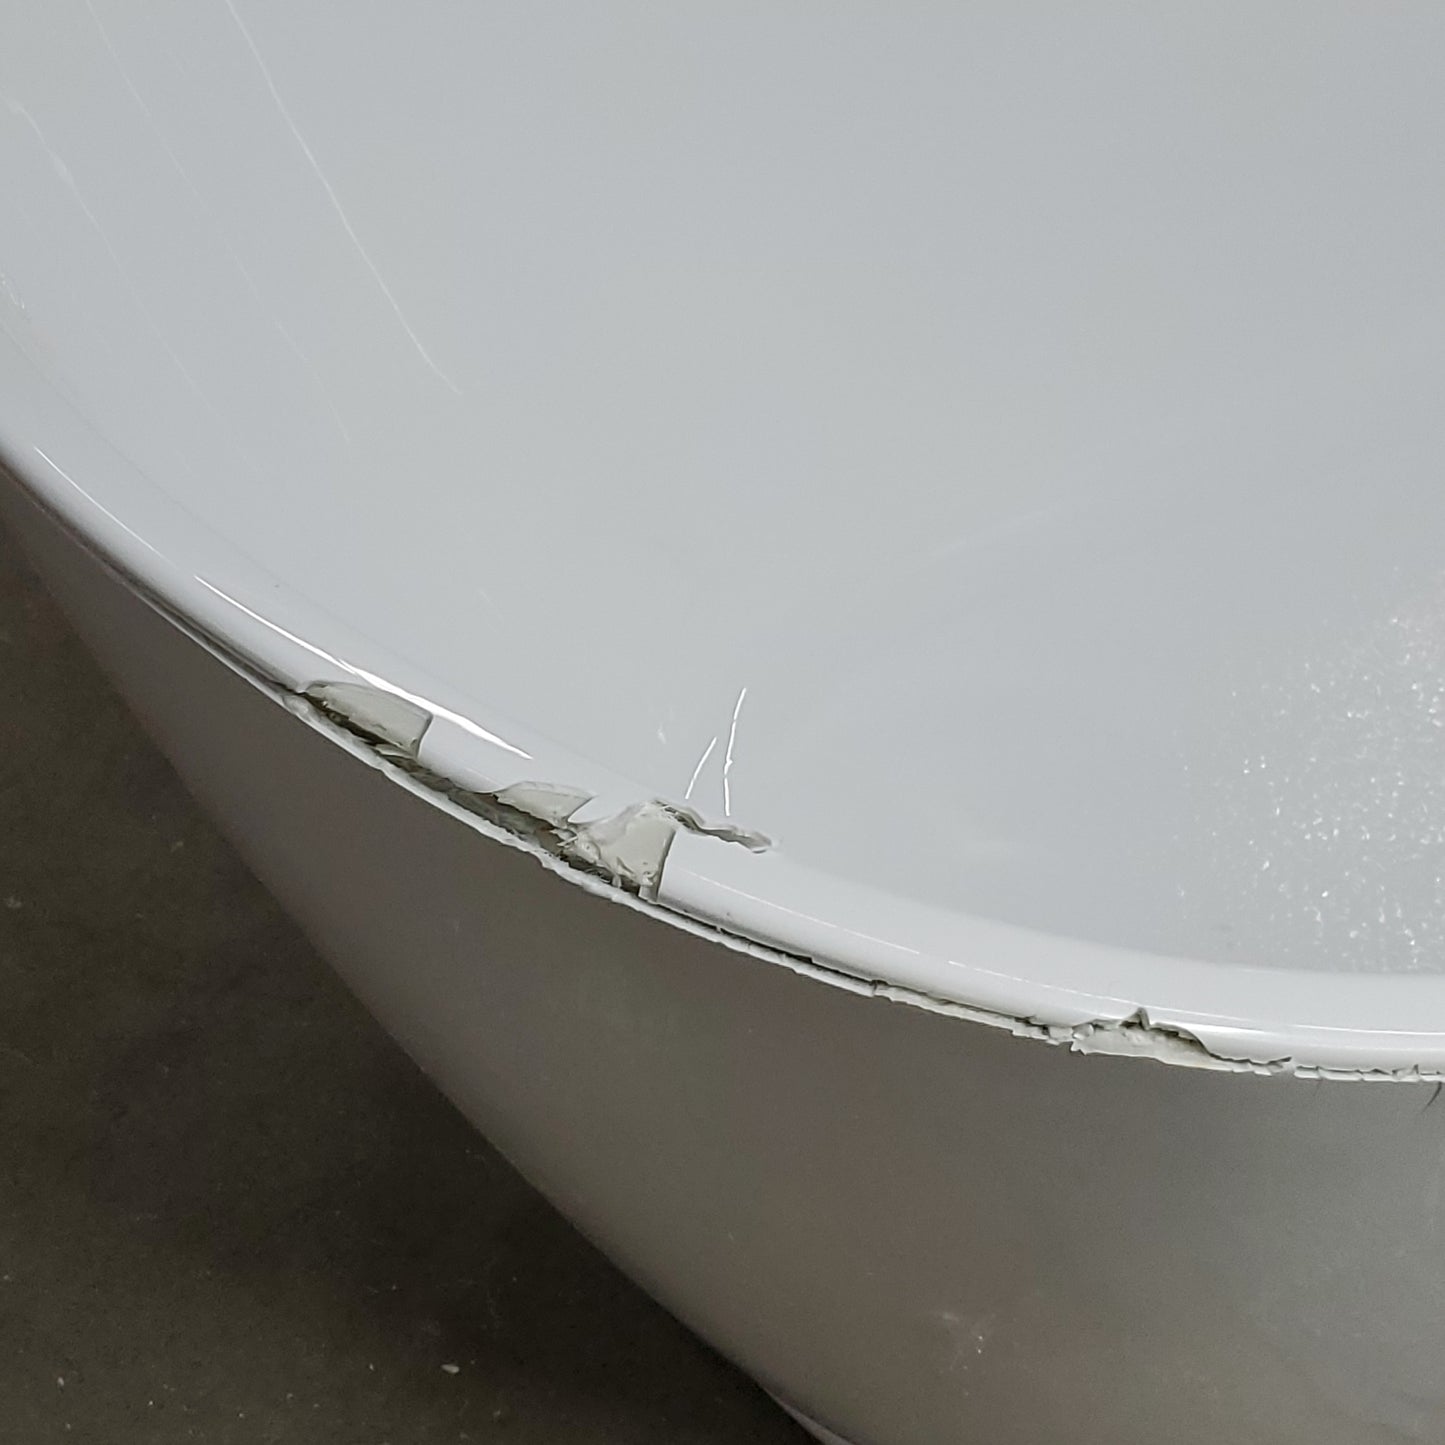 ZA@ WOODBRIDGE Freestanding Bathtub White BTA1515 (AS-IS, Has Large Crack on One End & 3" Crack on Other End)